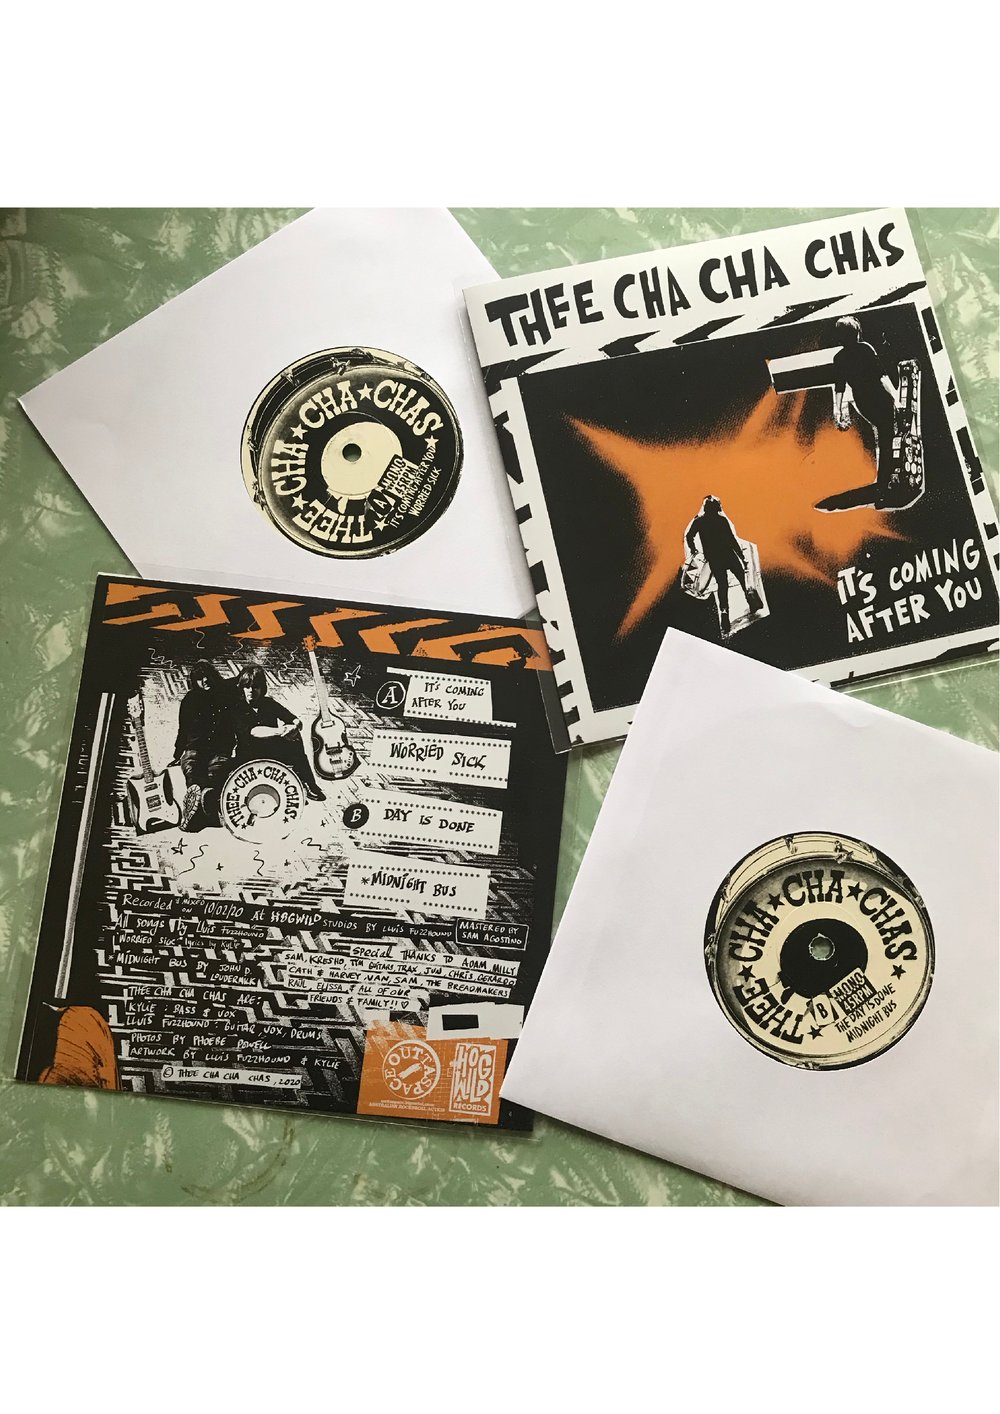 Thee Cha Cha Chas - It's Coming After You - 7" EP (Outtaspace/ Hogwild)